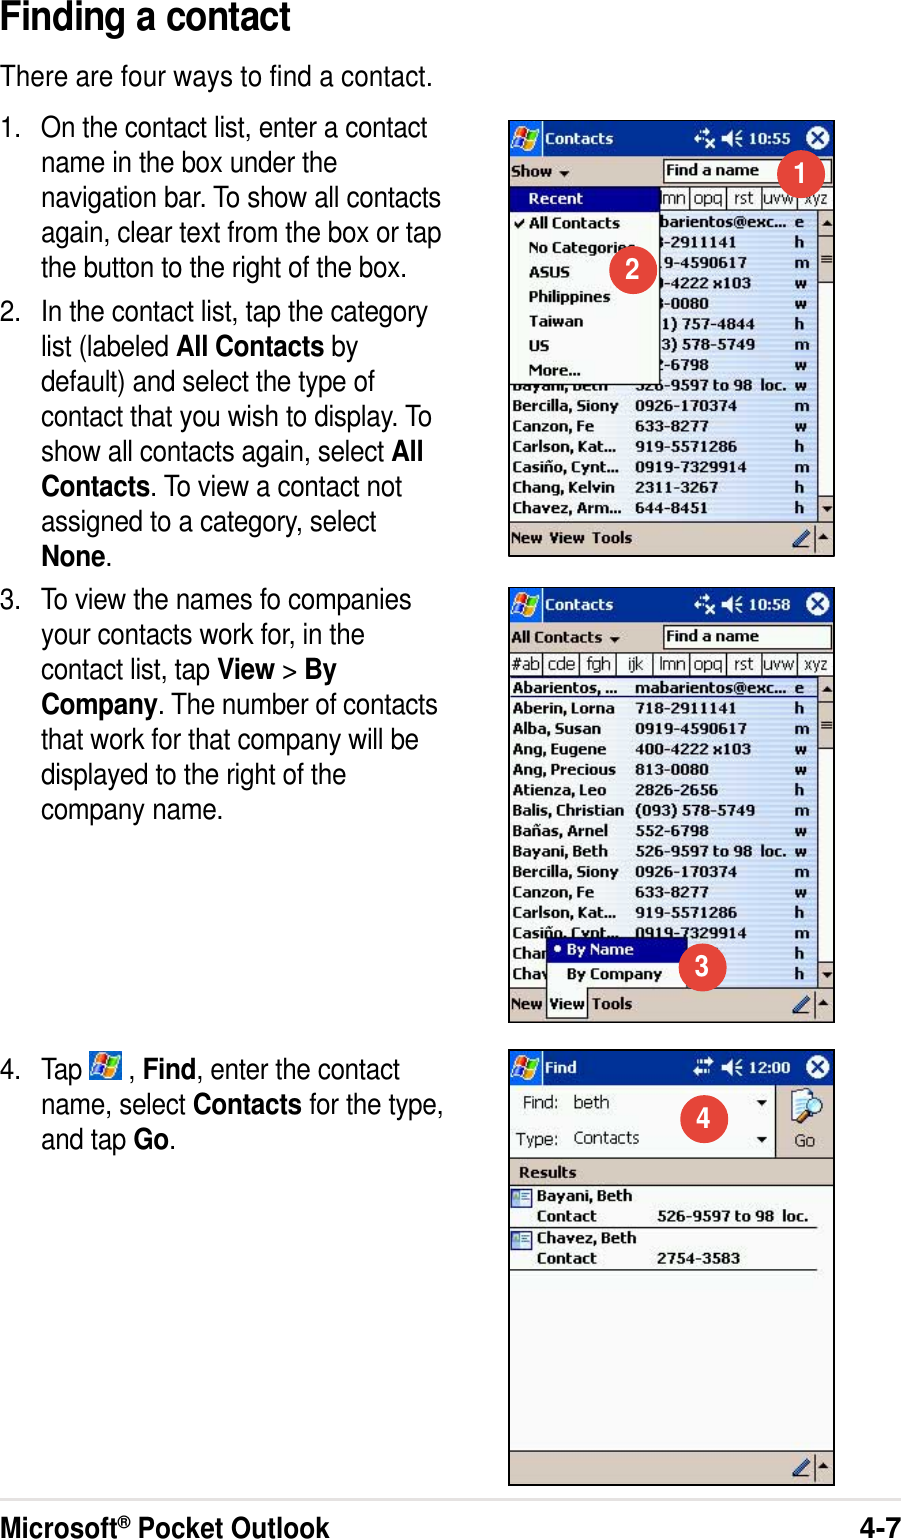 Microsoft® Pocket Outlook4-7Finding a contactThere are four ways to find a contact.1. On the contact list, enter a contactname in the box under thenavigation bar. To show all contactsagain, clear text from the box or tapthe button to the right of the box.2. In the contact list, tap the categorylist (labeled All Contacts bydefault) and select the type ofcontact that you wish to display. Toshow all contacts again, select AllContacts. To view a contact notassigned to a category, selectNone.3. To view the names fo companiesyour contacts work for, in thecontact list, tap View &gt; ByCompany. The number of contactsthat work for that company will bedisplayed to the right of thecompany name.4. Tap   , Find, enter the contactname, select Contacts for the type,and tap Go.1234